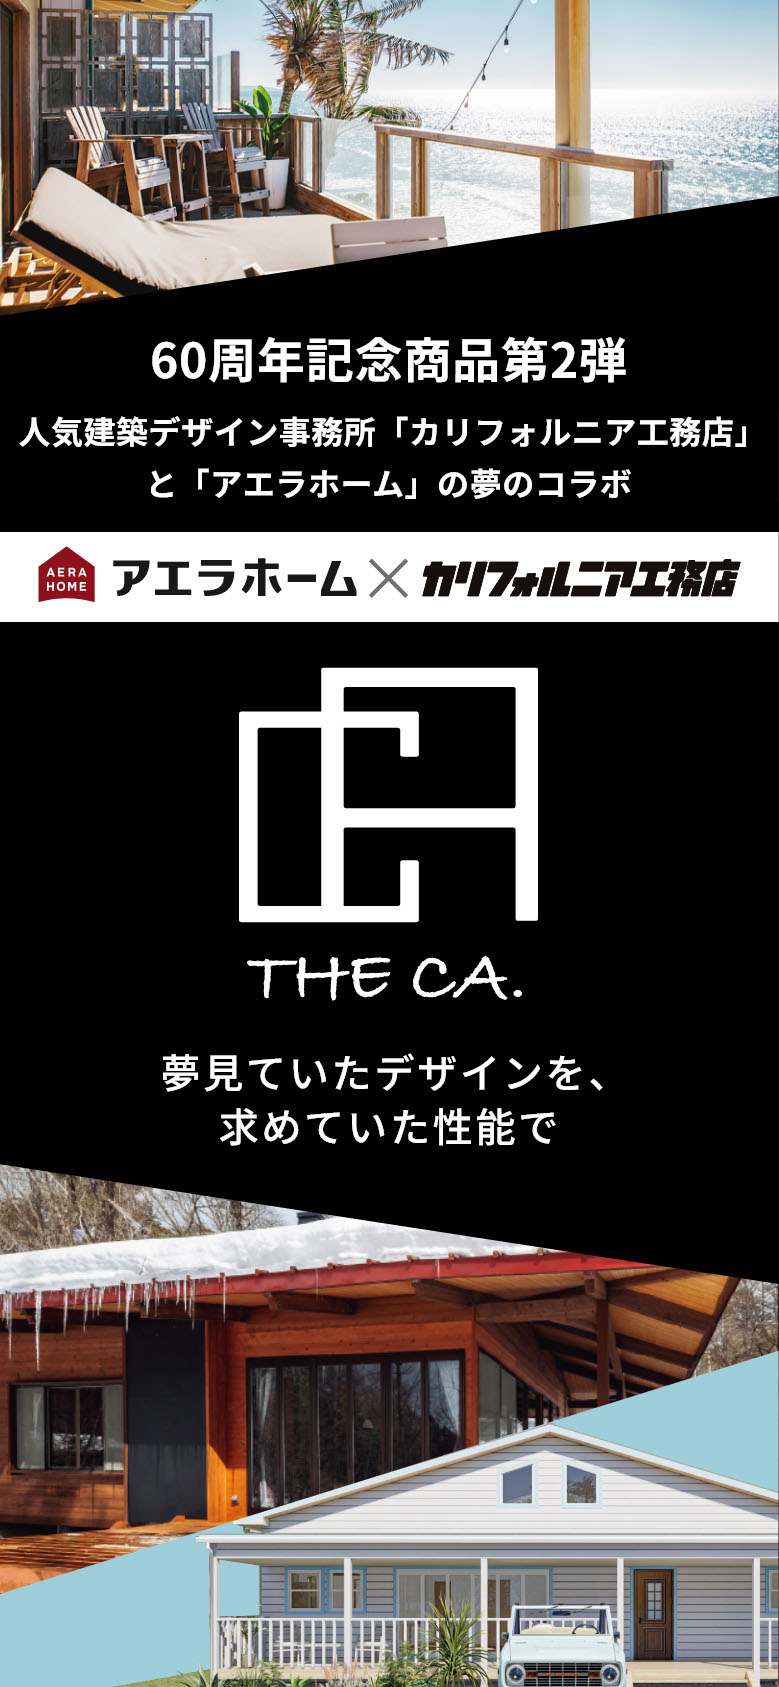 THE CA.